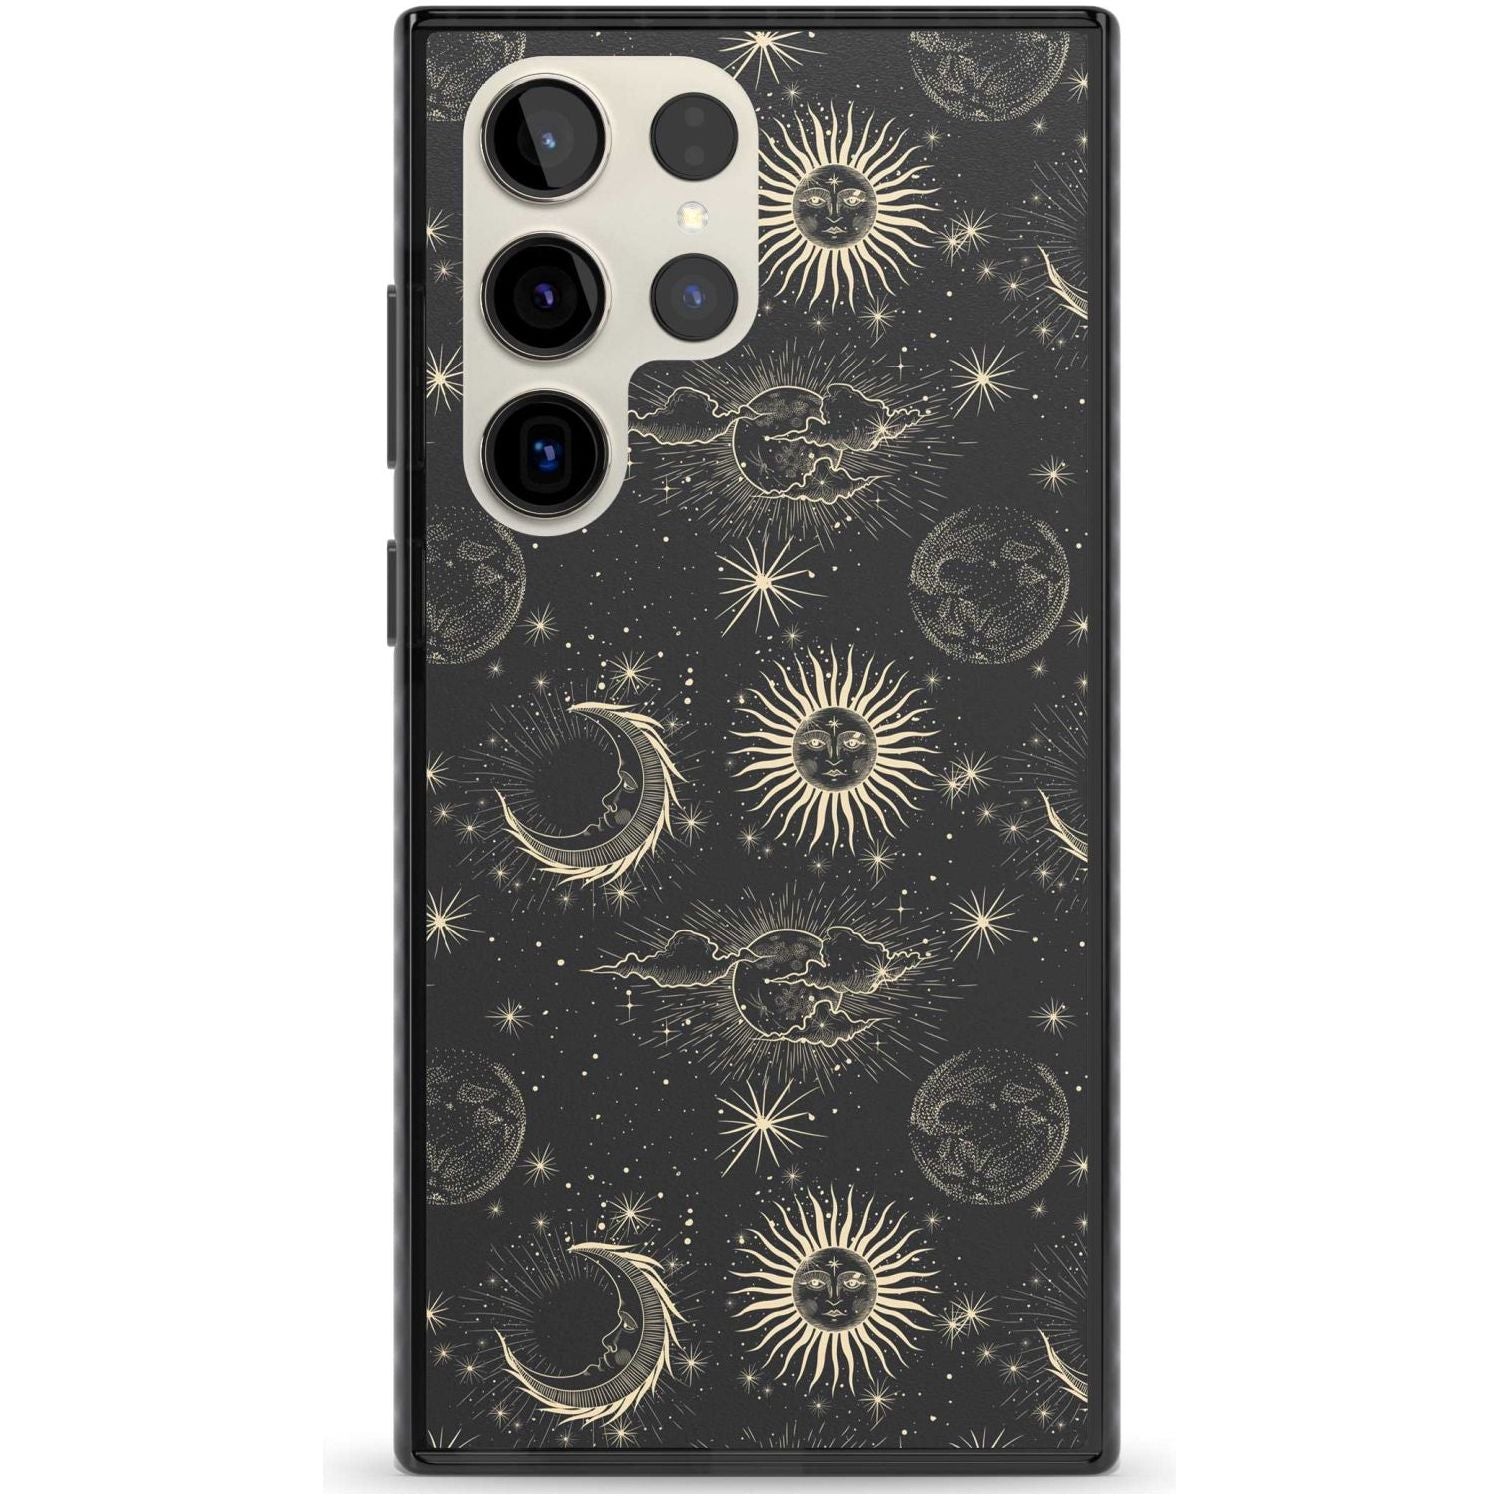 Large Suns, Moons & Clouds Astrological Phone Case Samsung S22 Ultra / Black Impact Case,Samsung S23 Ultra / Black Impact Case Blanc Space